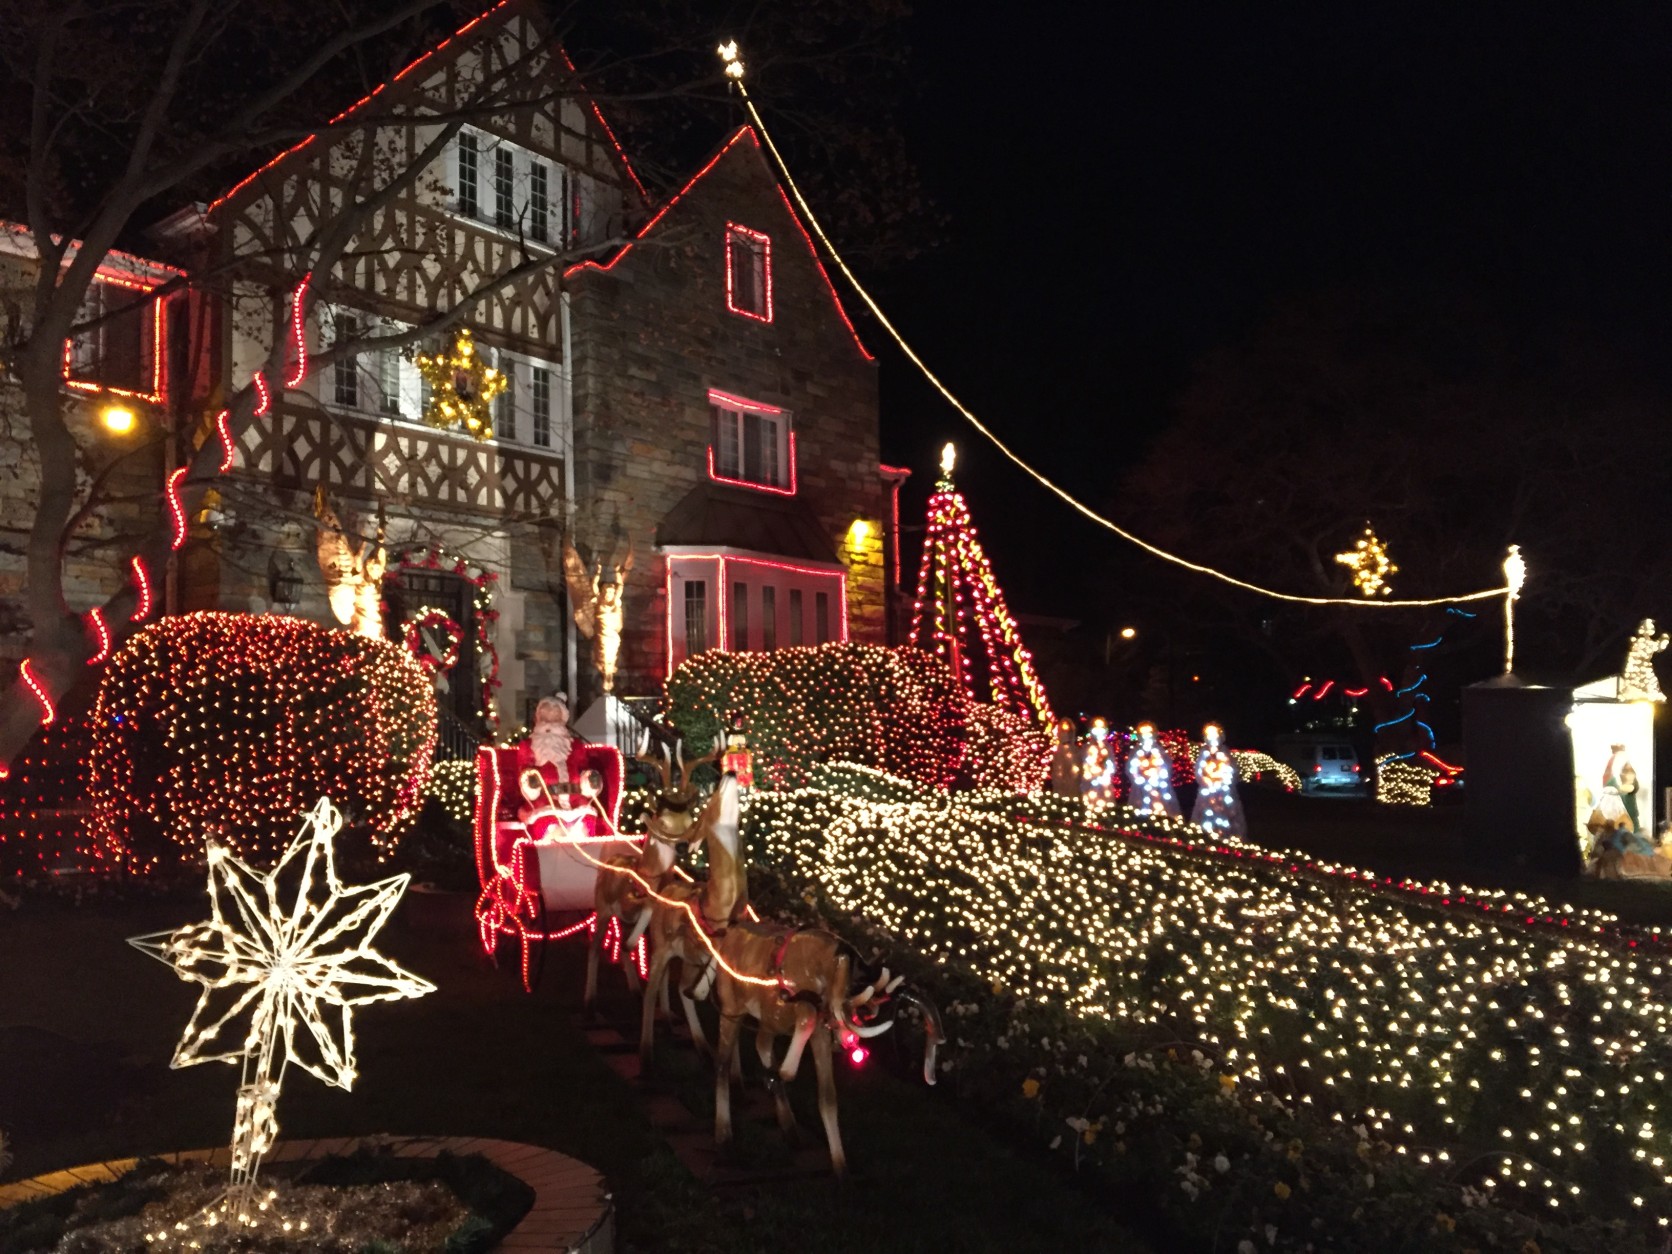 Yes, that's Santa and his reindeer (see Rudolph's nose?) in the front yard of this fantastically decorated house in D.C. (WTOP/Michelle Basch)